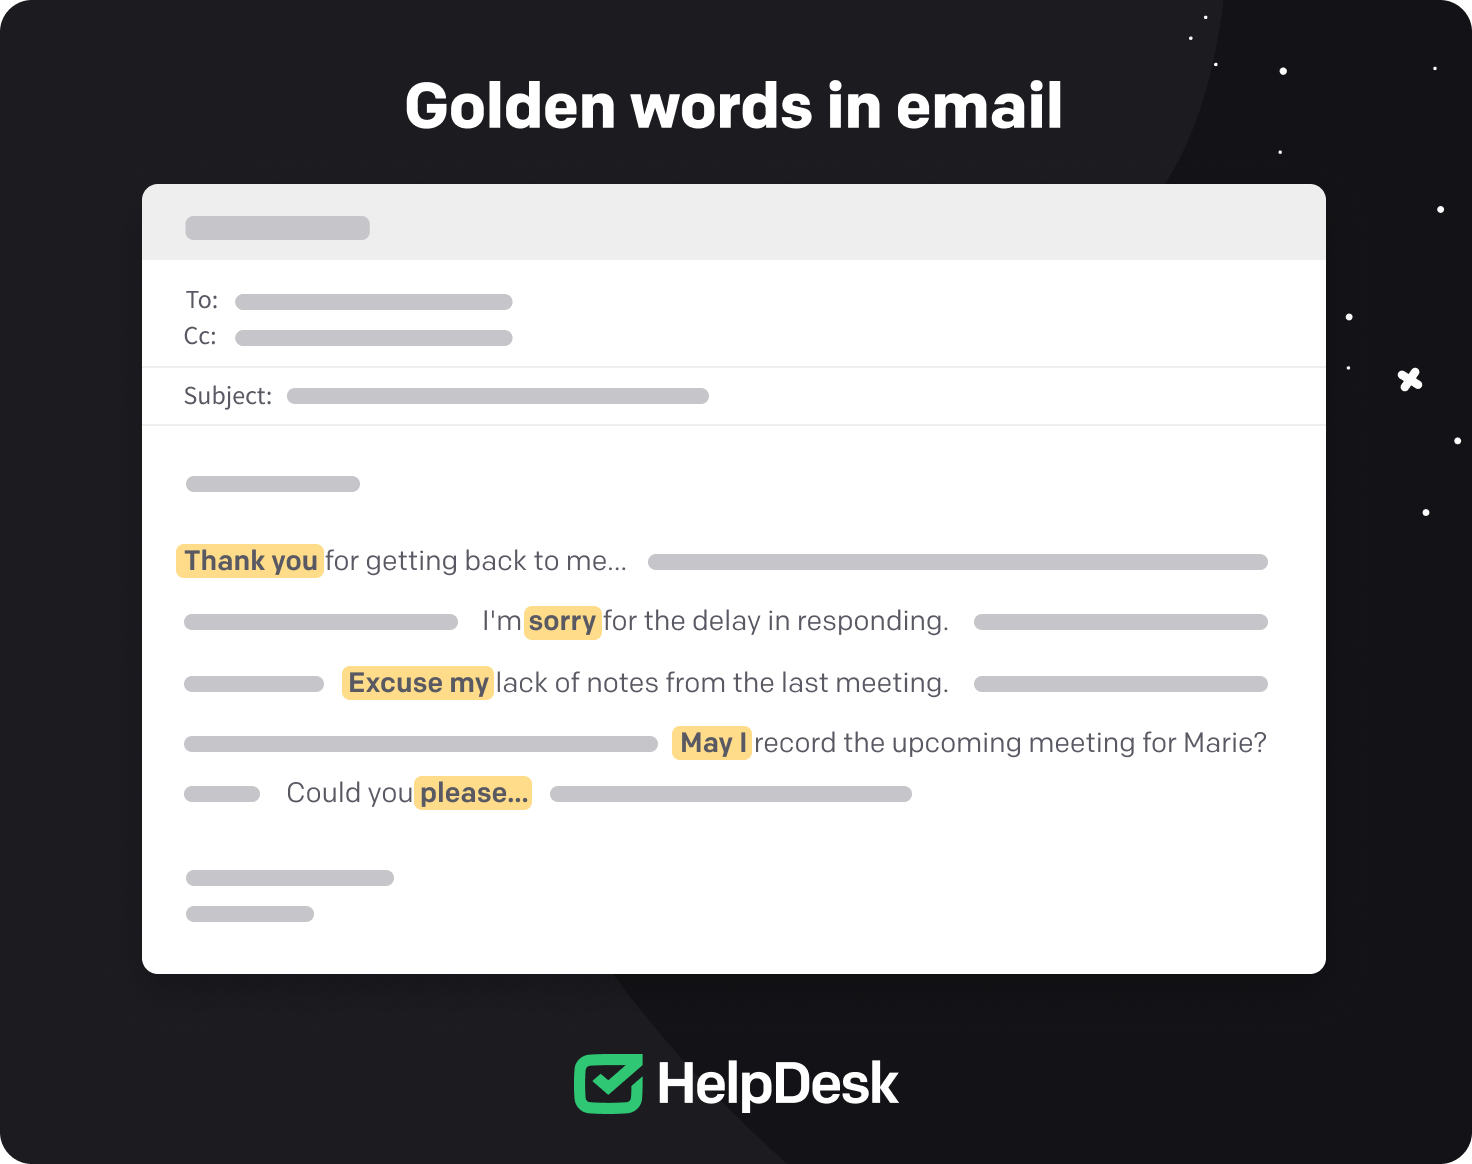 Golden words used in text email communication.